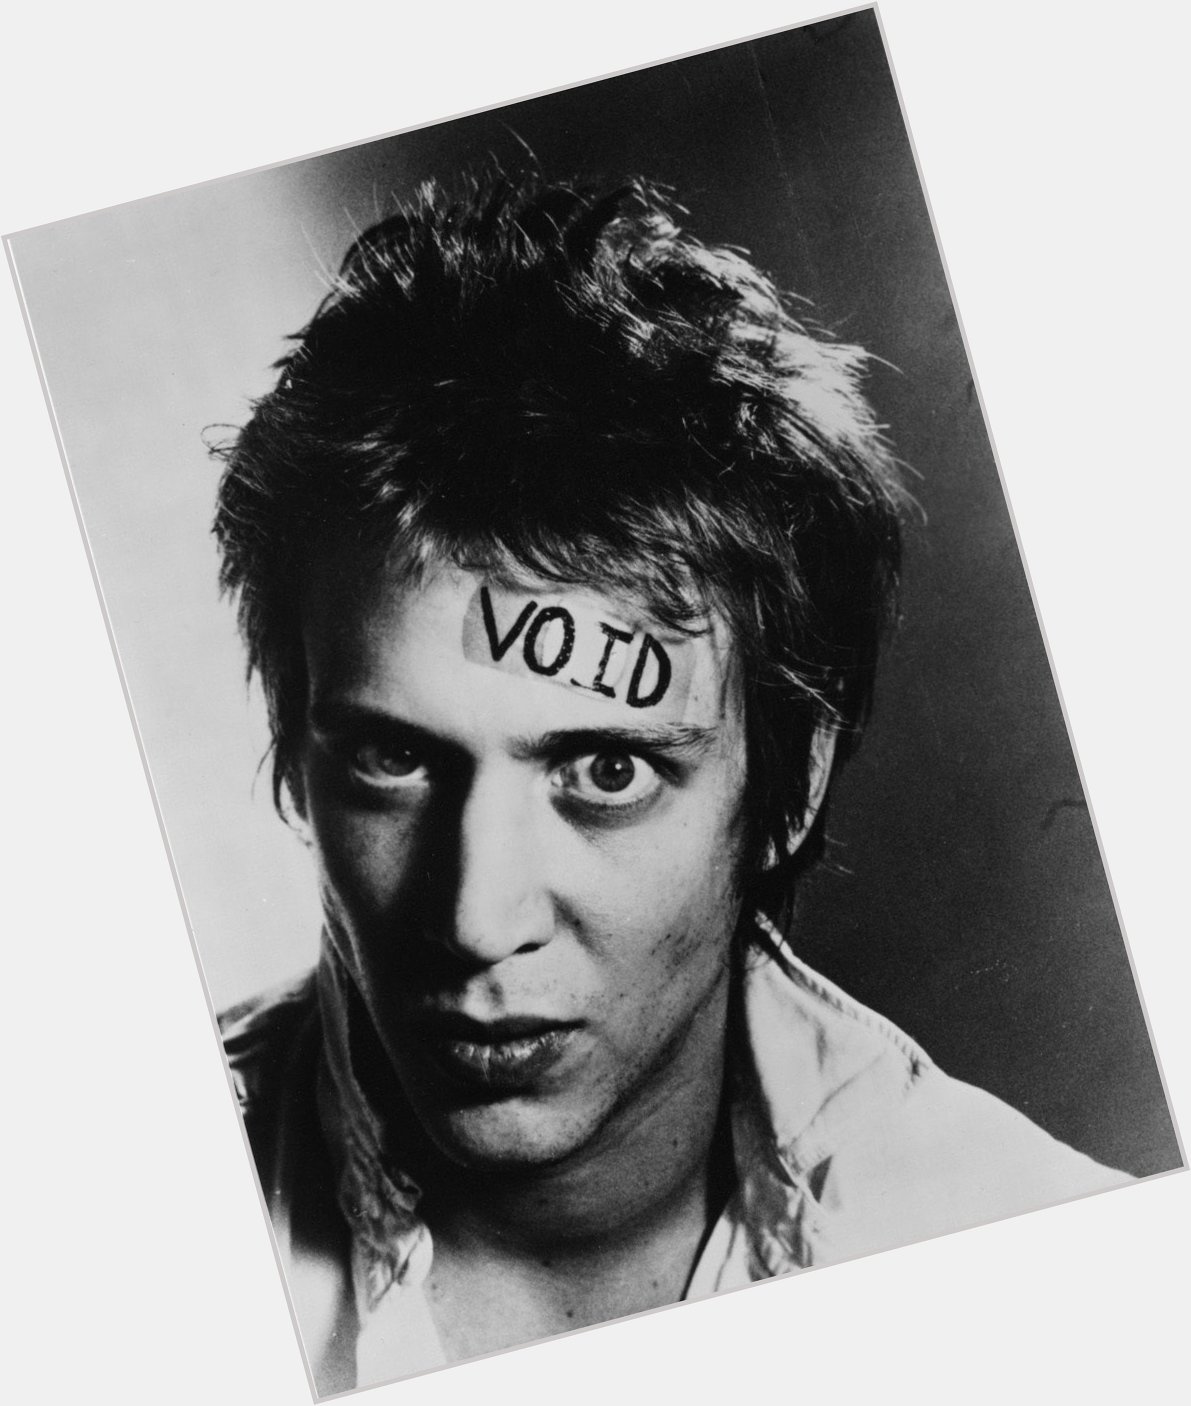 Happy birthday to one of my favorite poets, Richard Hell 